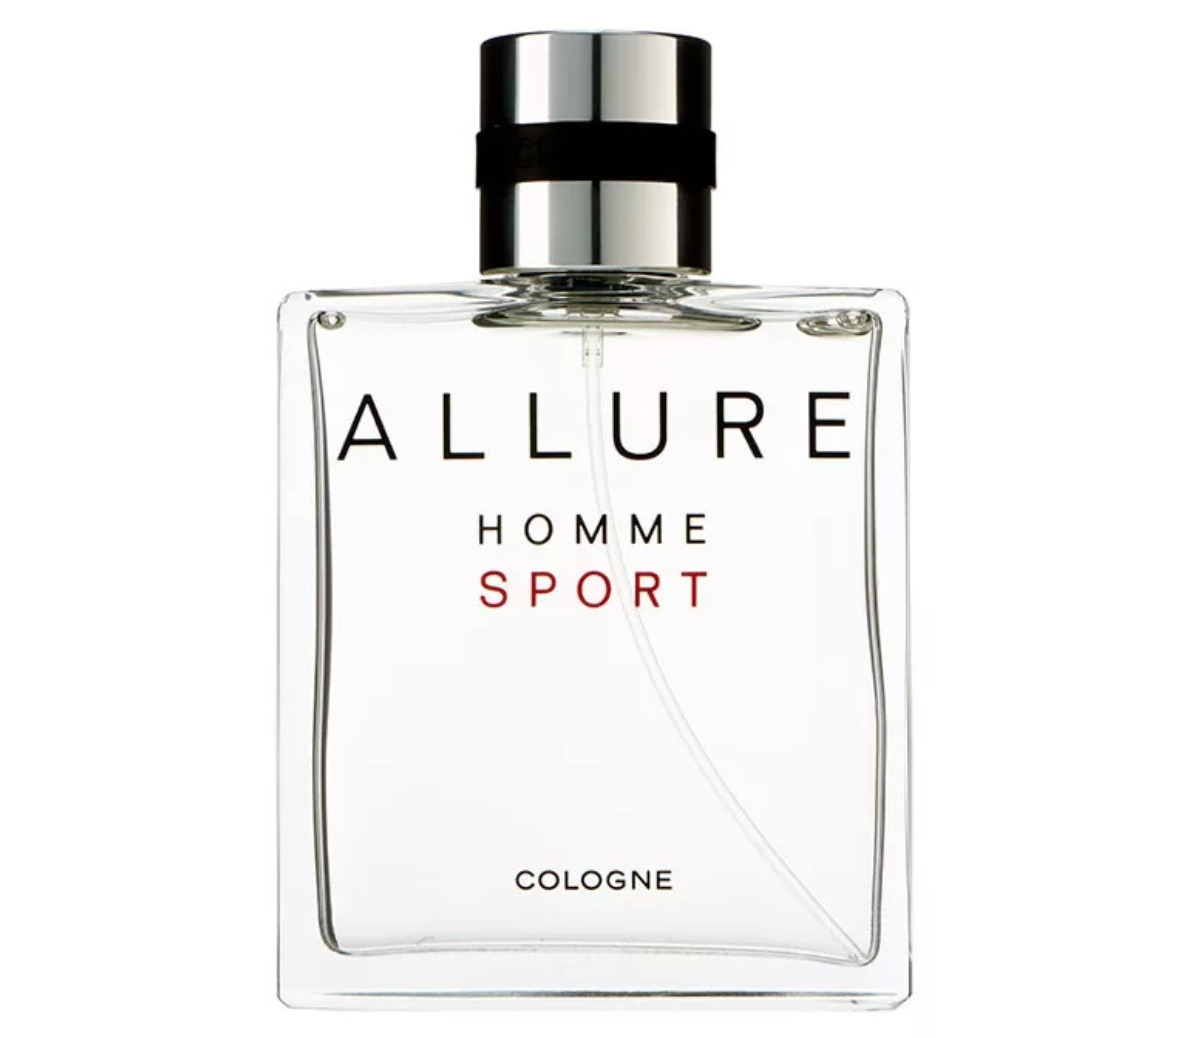 Allure homme cologne. Chanel Allure homme Sport. Chanel Allure homme Sport 100ml. Chanel Allure homme Sport Cologne. Chanel Allure Sport 100 ml.